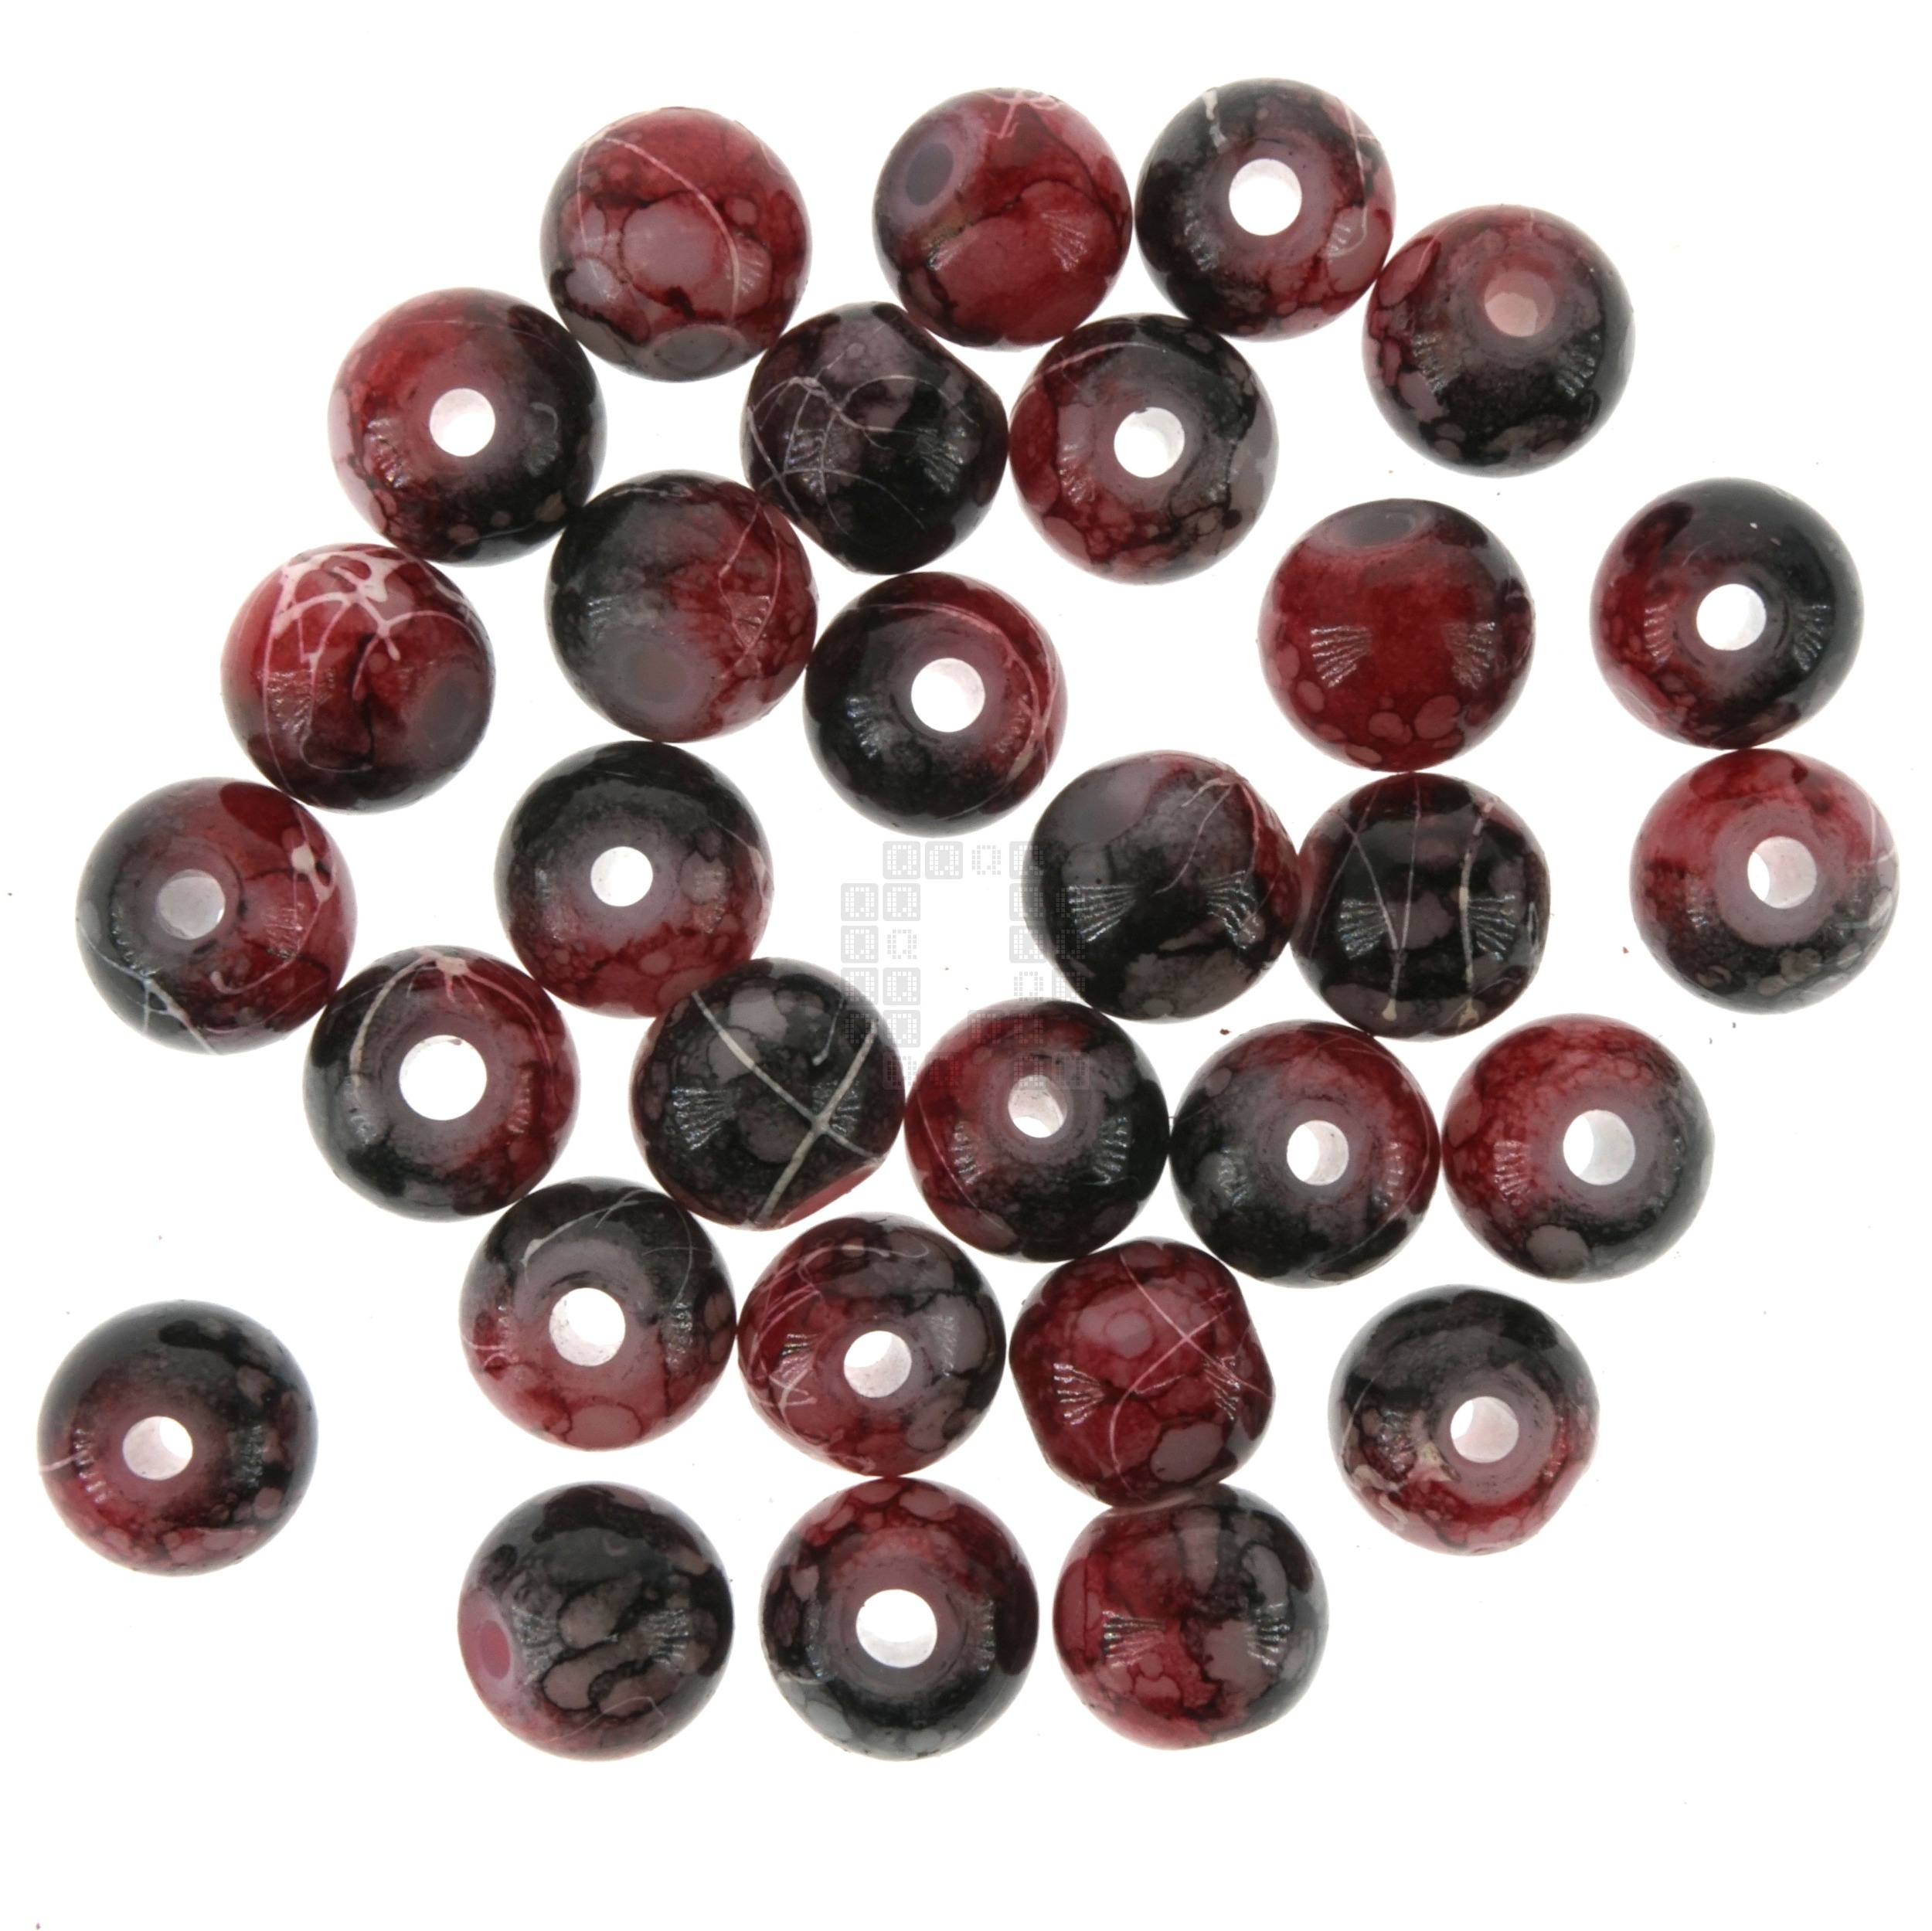 Black Cherry 8mm Loose Glass Beads, 30 Pieces